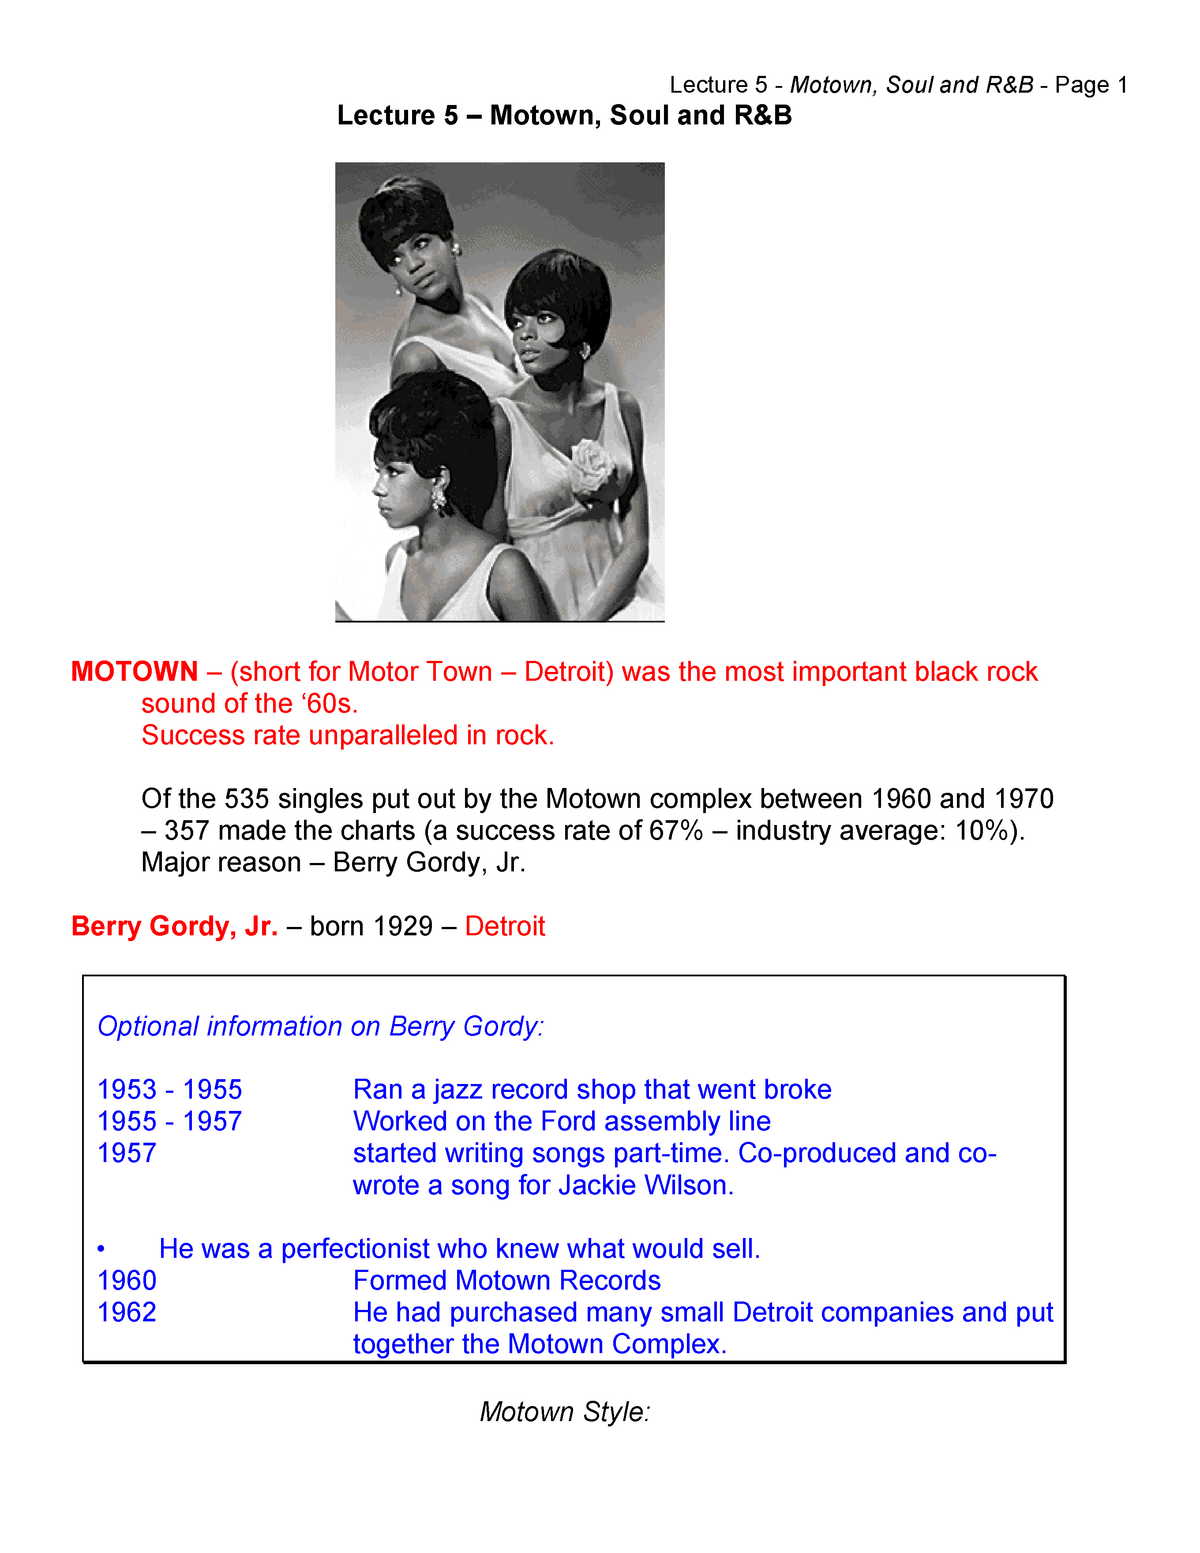 21 outline - Motown, Soul - MUS A21 - History Of Rock Music - OCC